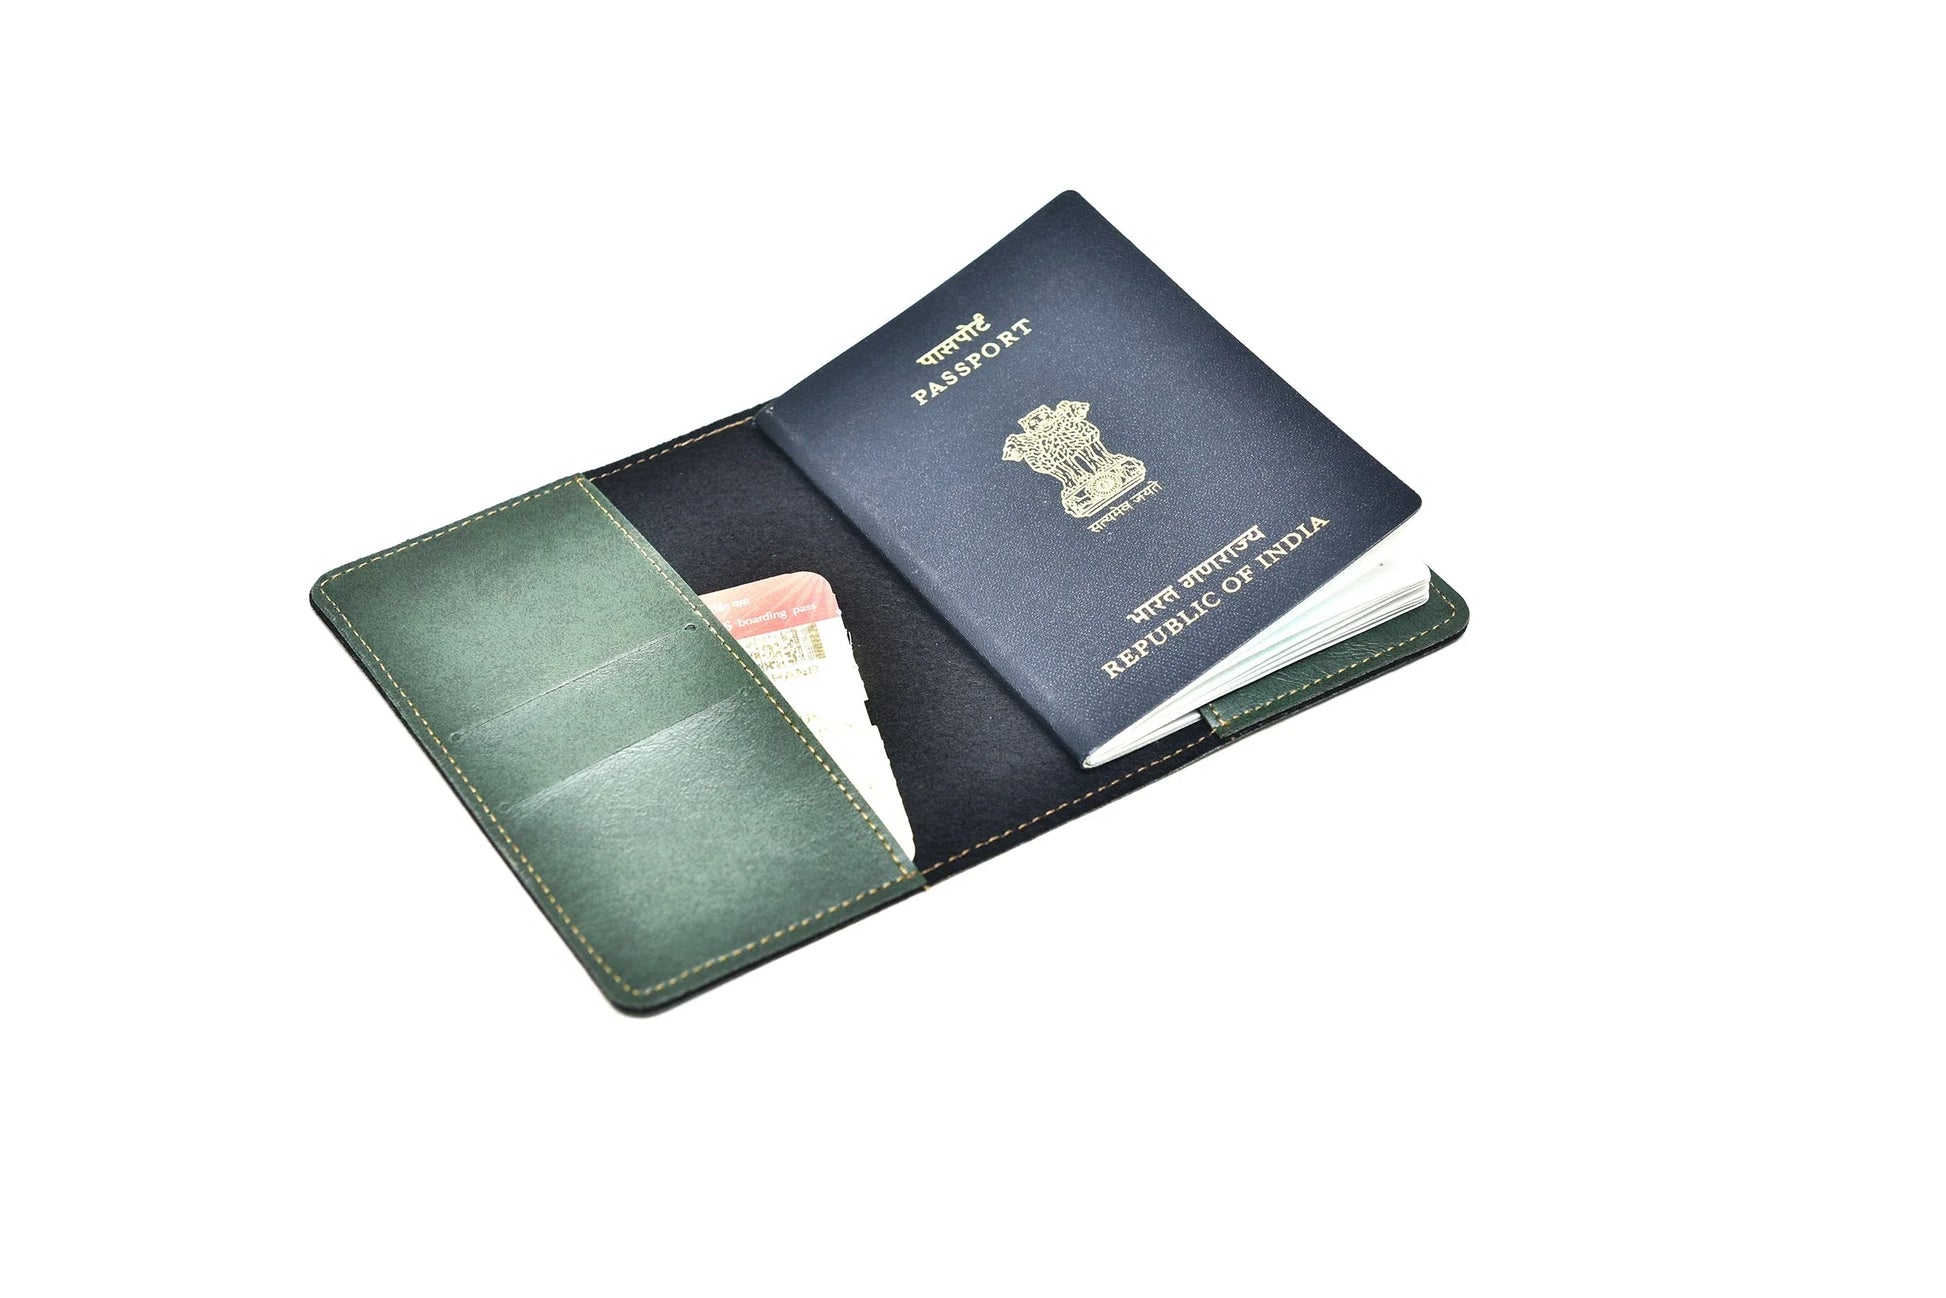 Inside or open view of passport case 